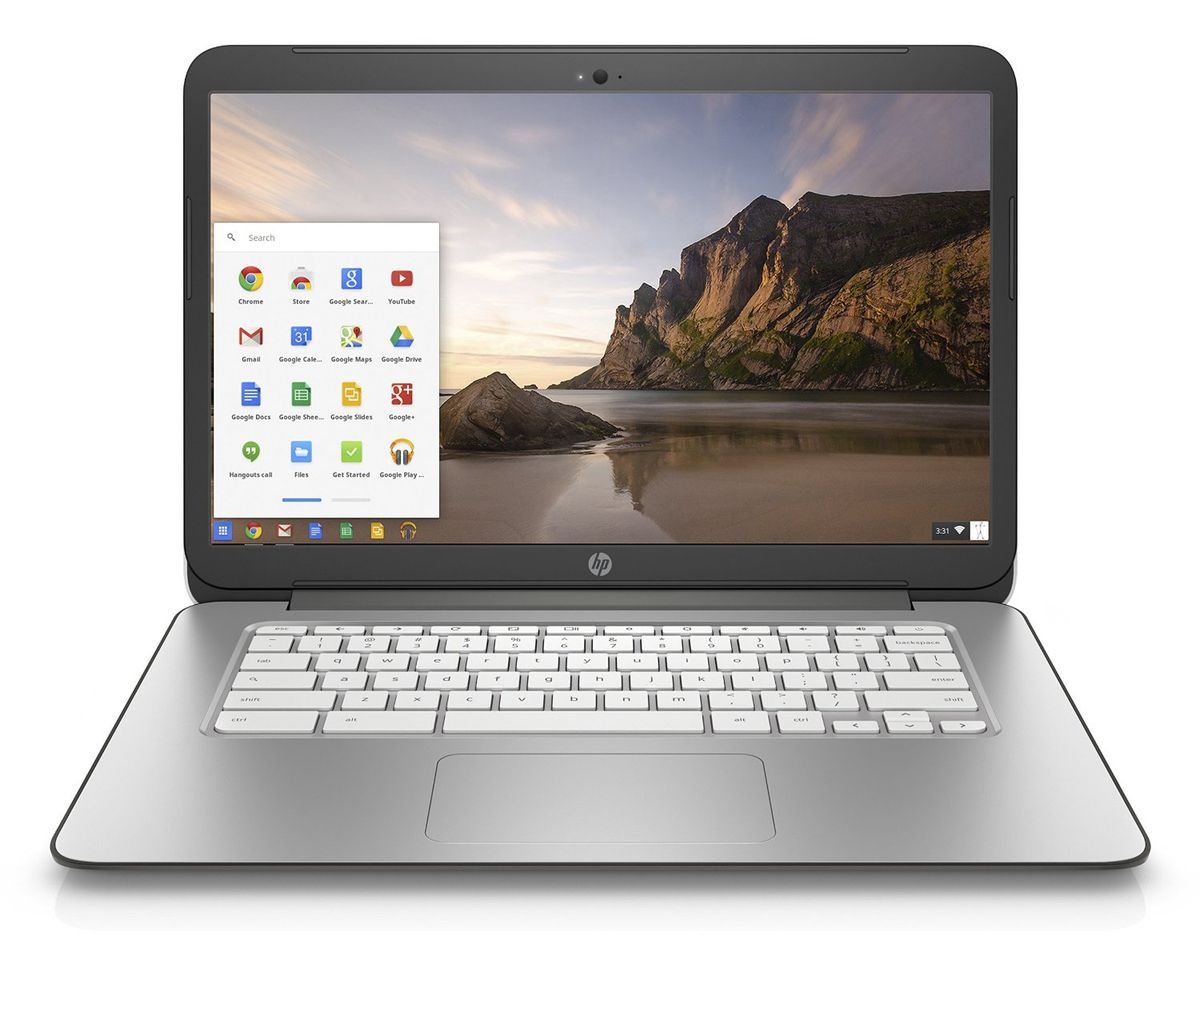 HP Launches Chromebook 14 With Touchscreen, 4 GB RAM And 32 GB Storage